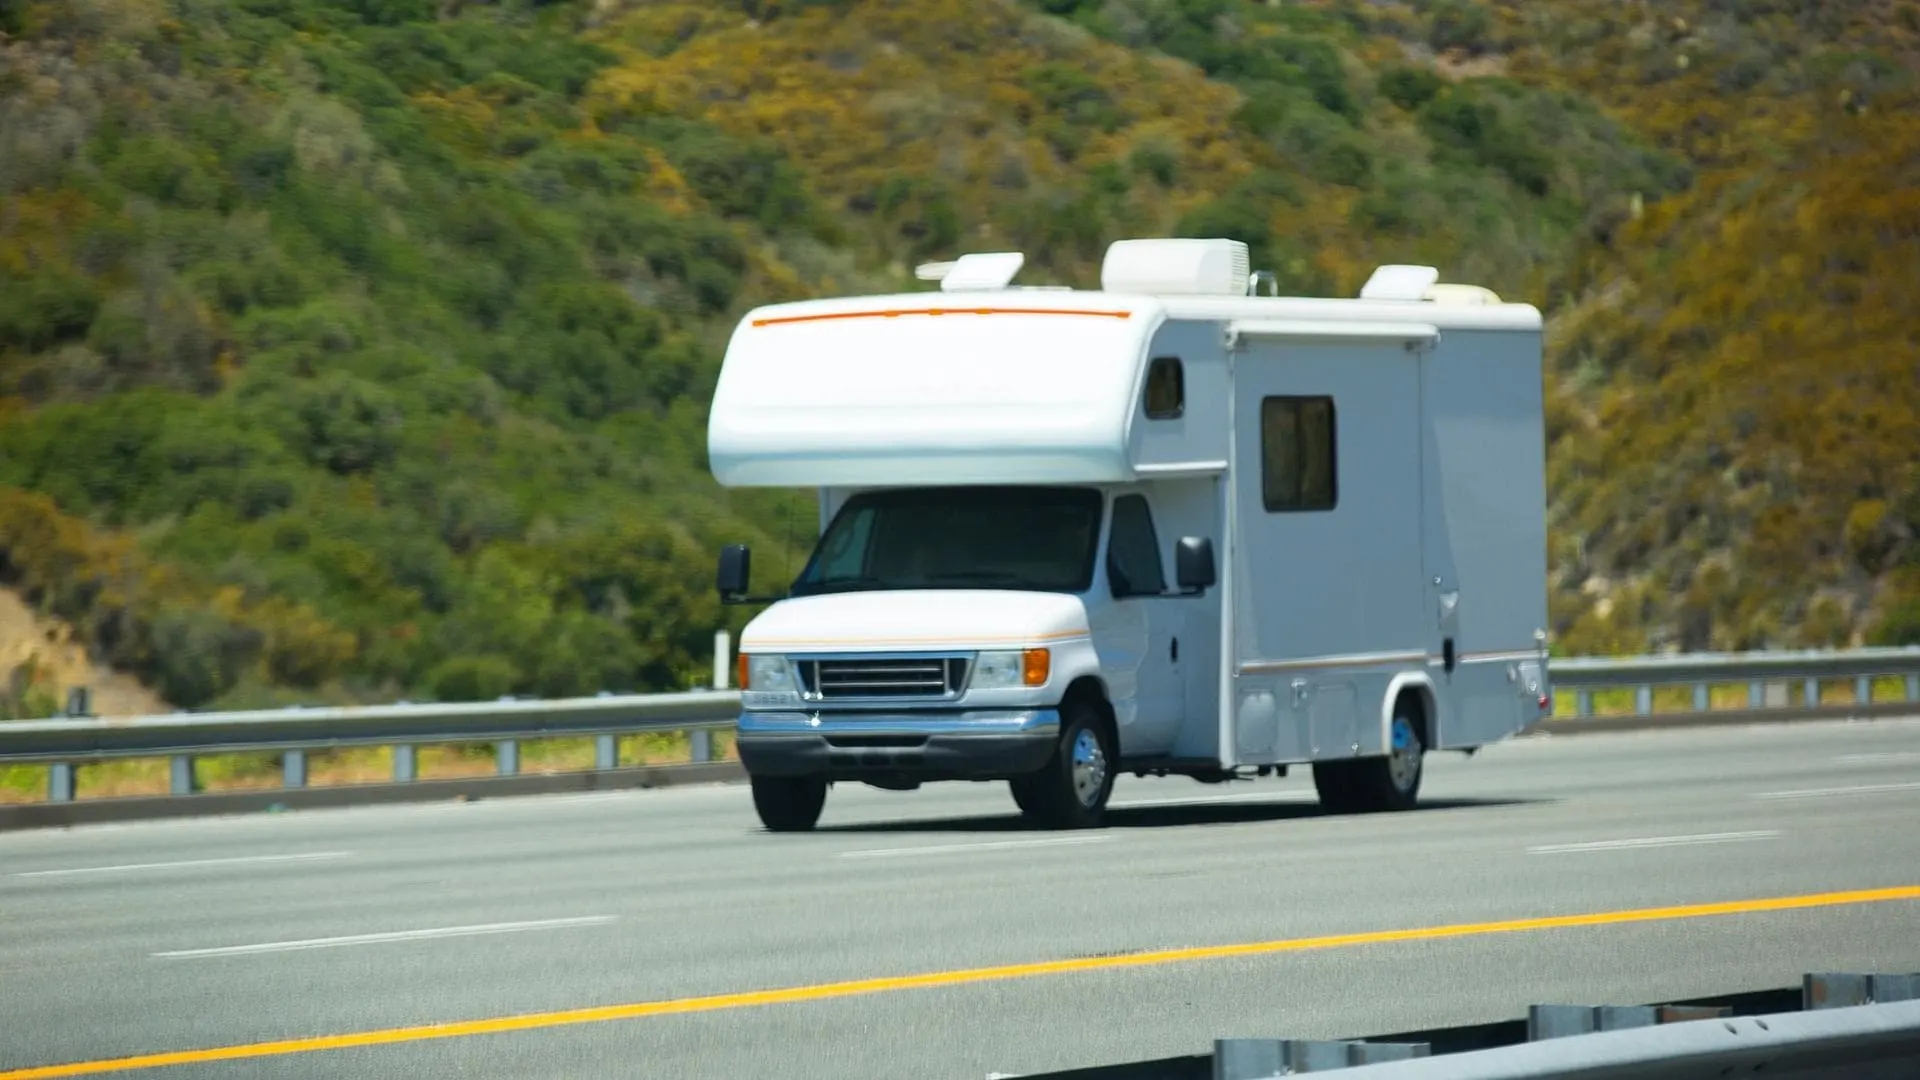 It is easier to register and insure an RV vs a tiny house because all RVs are classified motorhomes or trailers